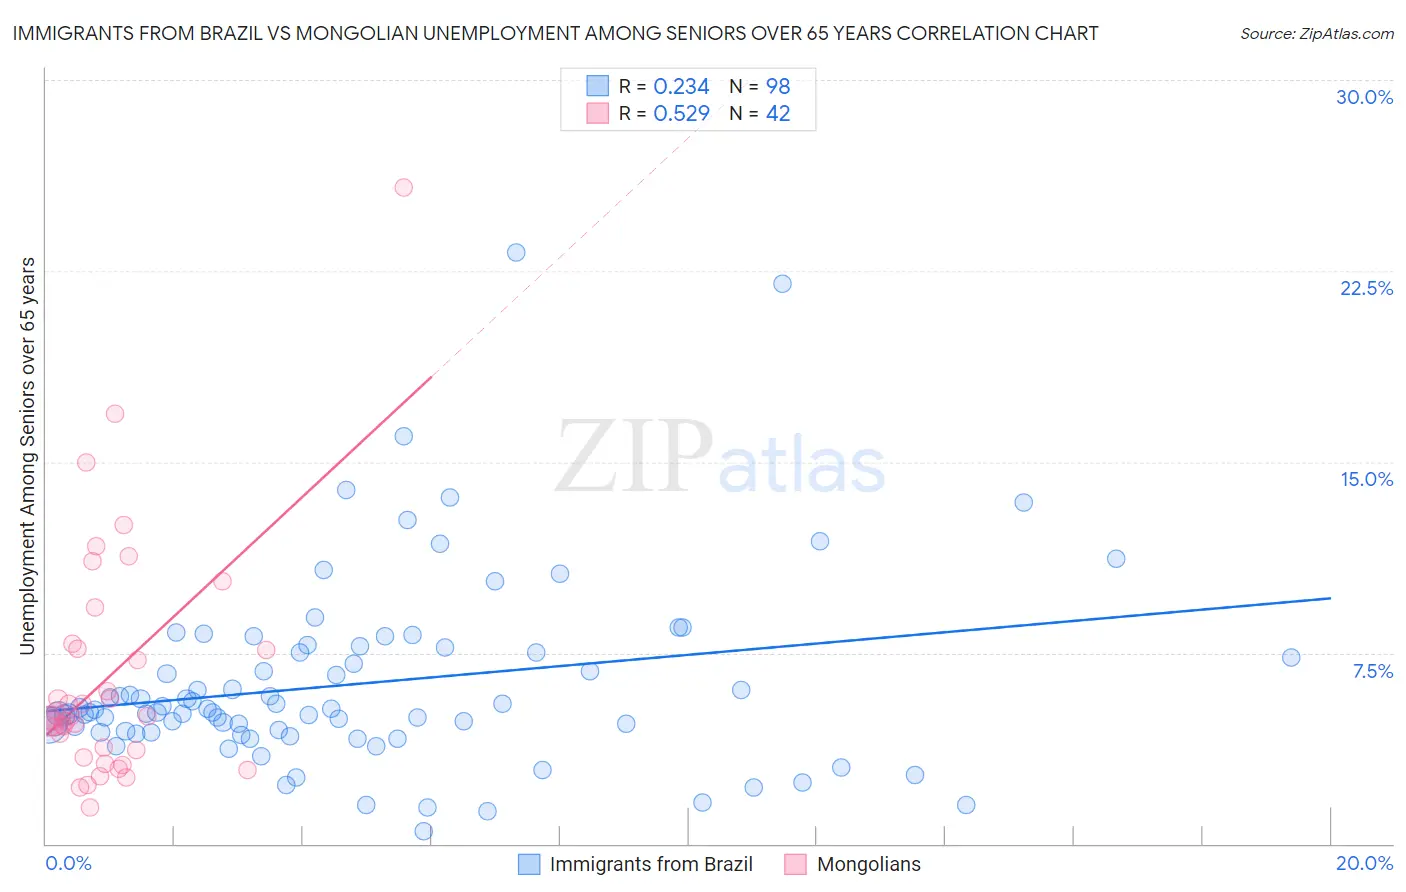 Immigrants from Brazil vs Mongolian Unemployment Among Seniors over 65 years